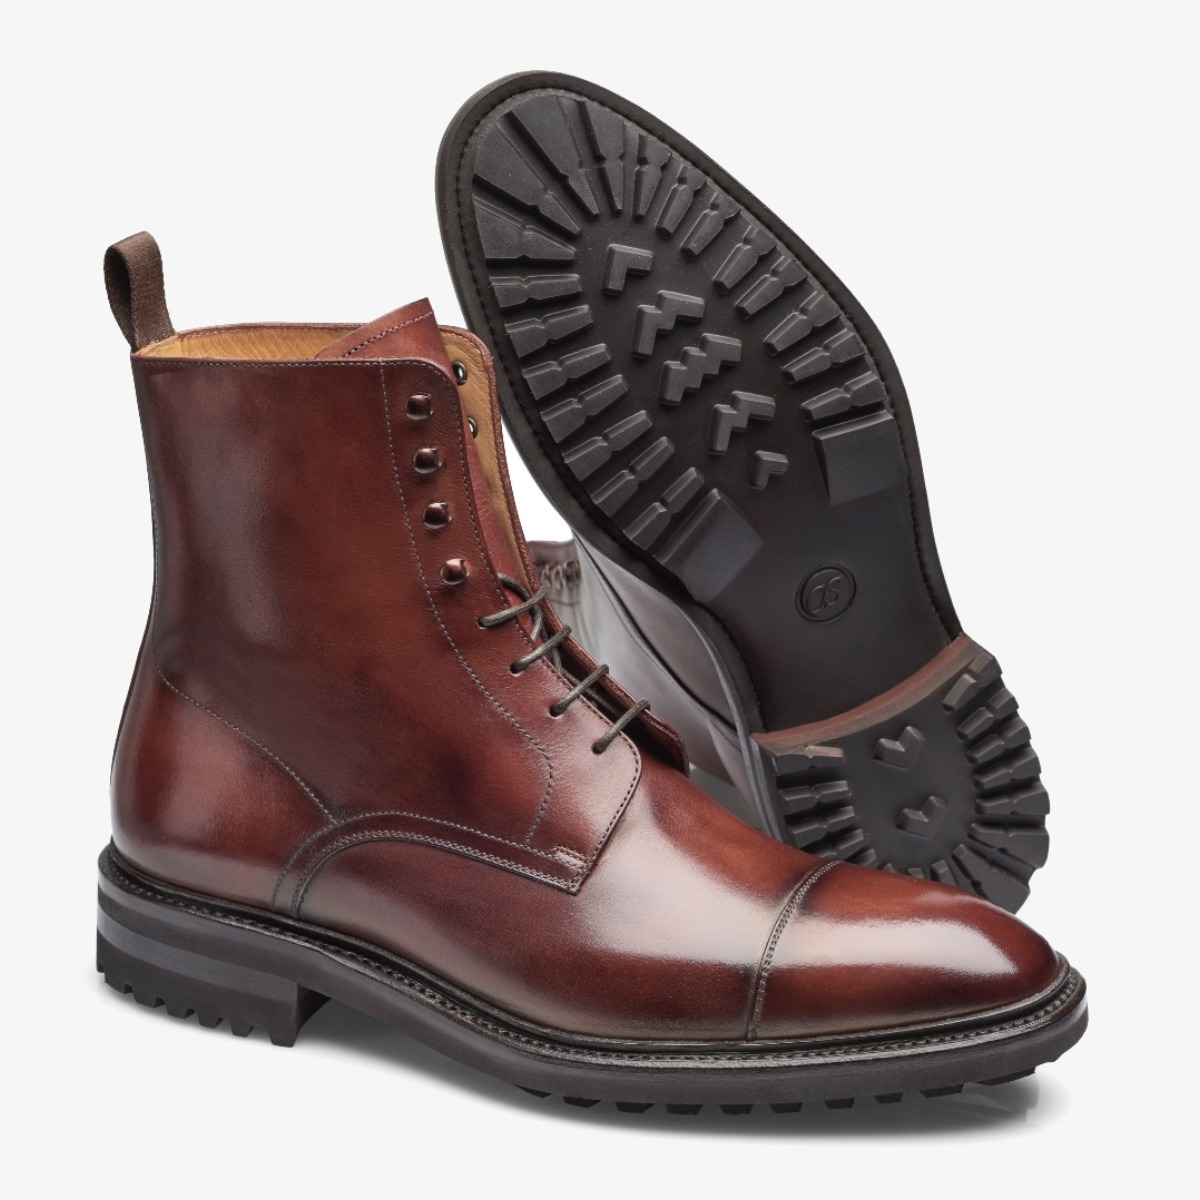 Carlos Santos 8866 Stallone burgundy shadow lace-up boots